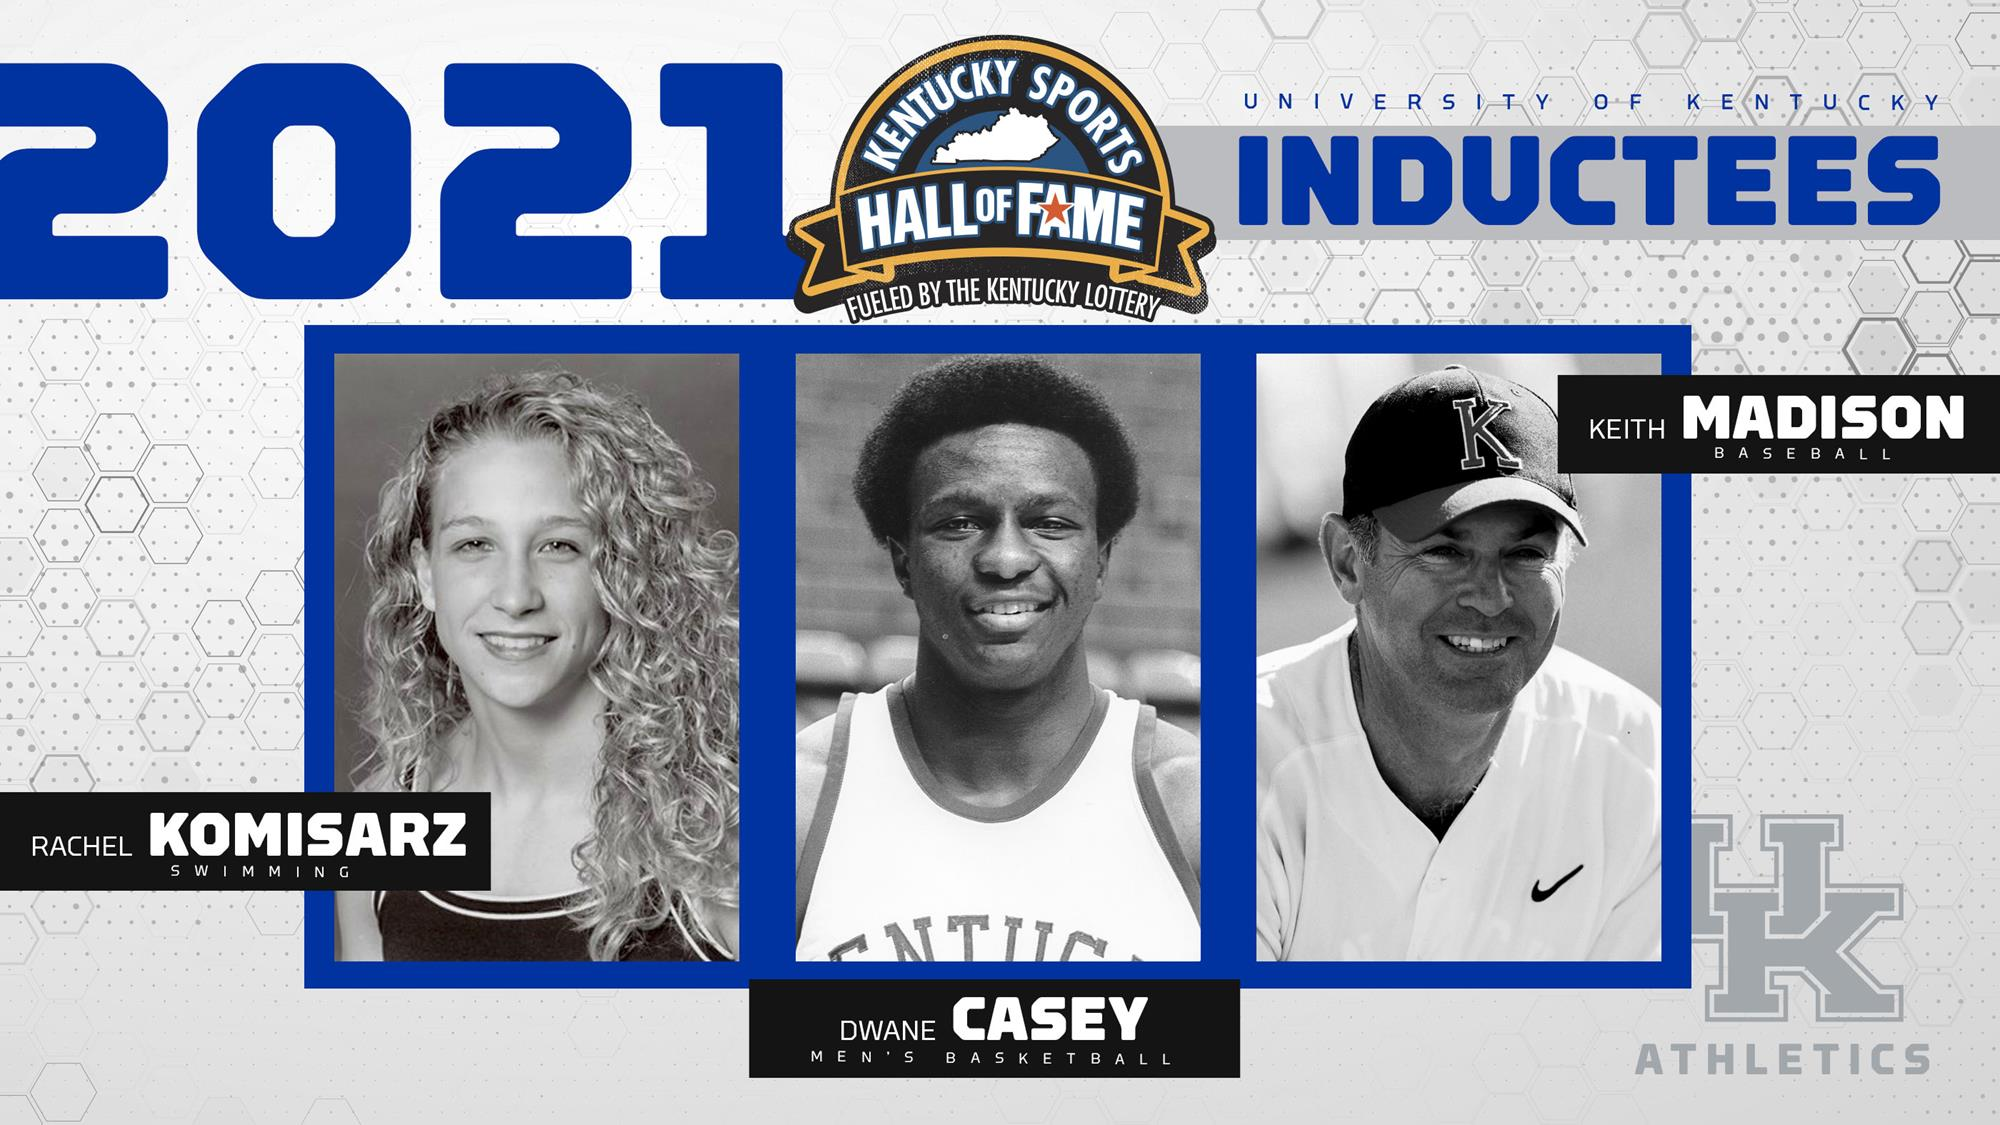 Dwane Casey, Rachel Komisarz Baugh and Keith Madison Elected to Kentucky Sports Hall of Fame